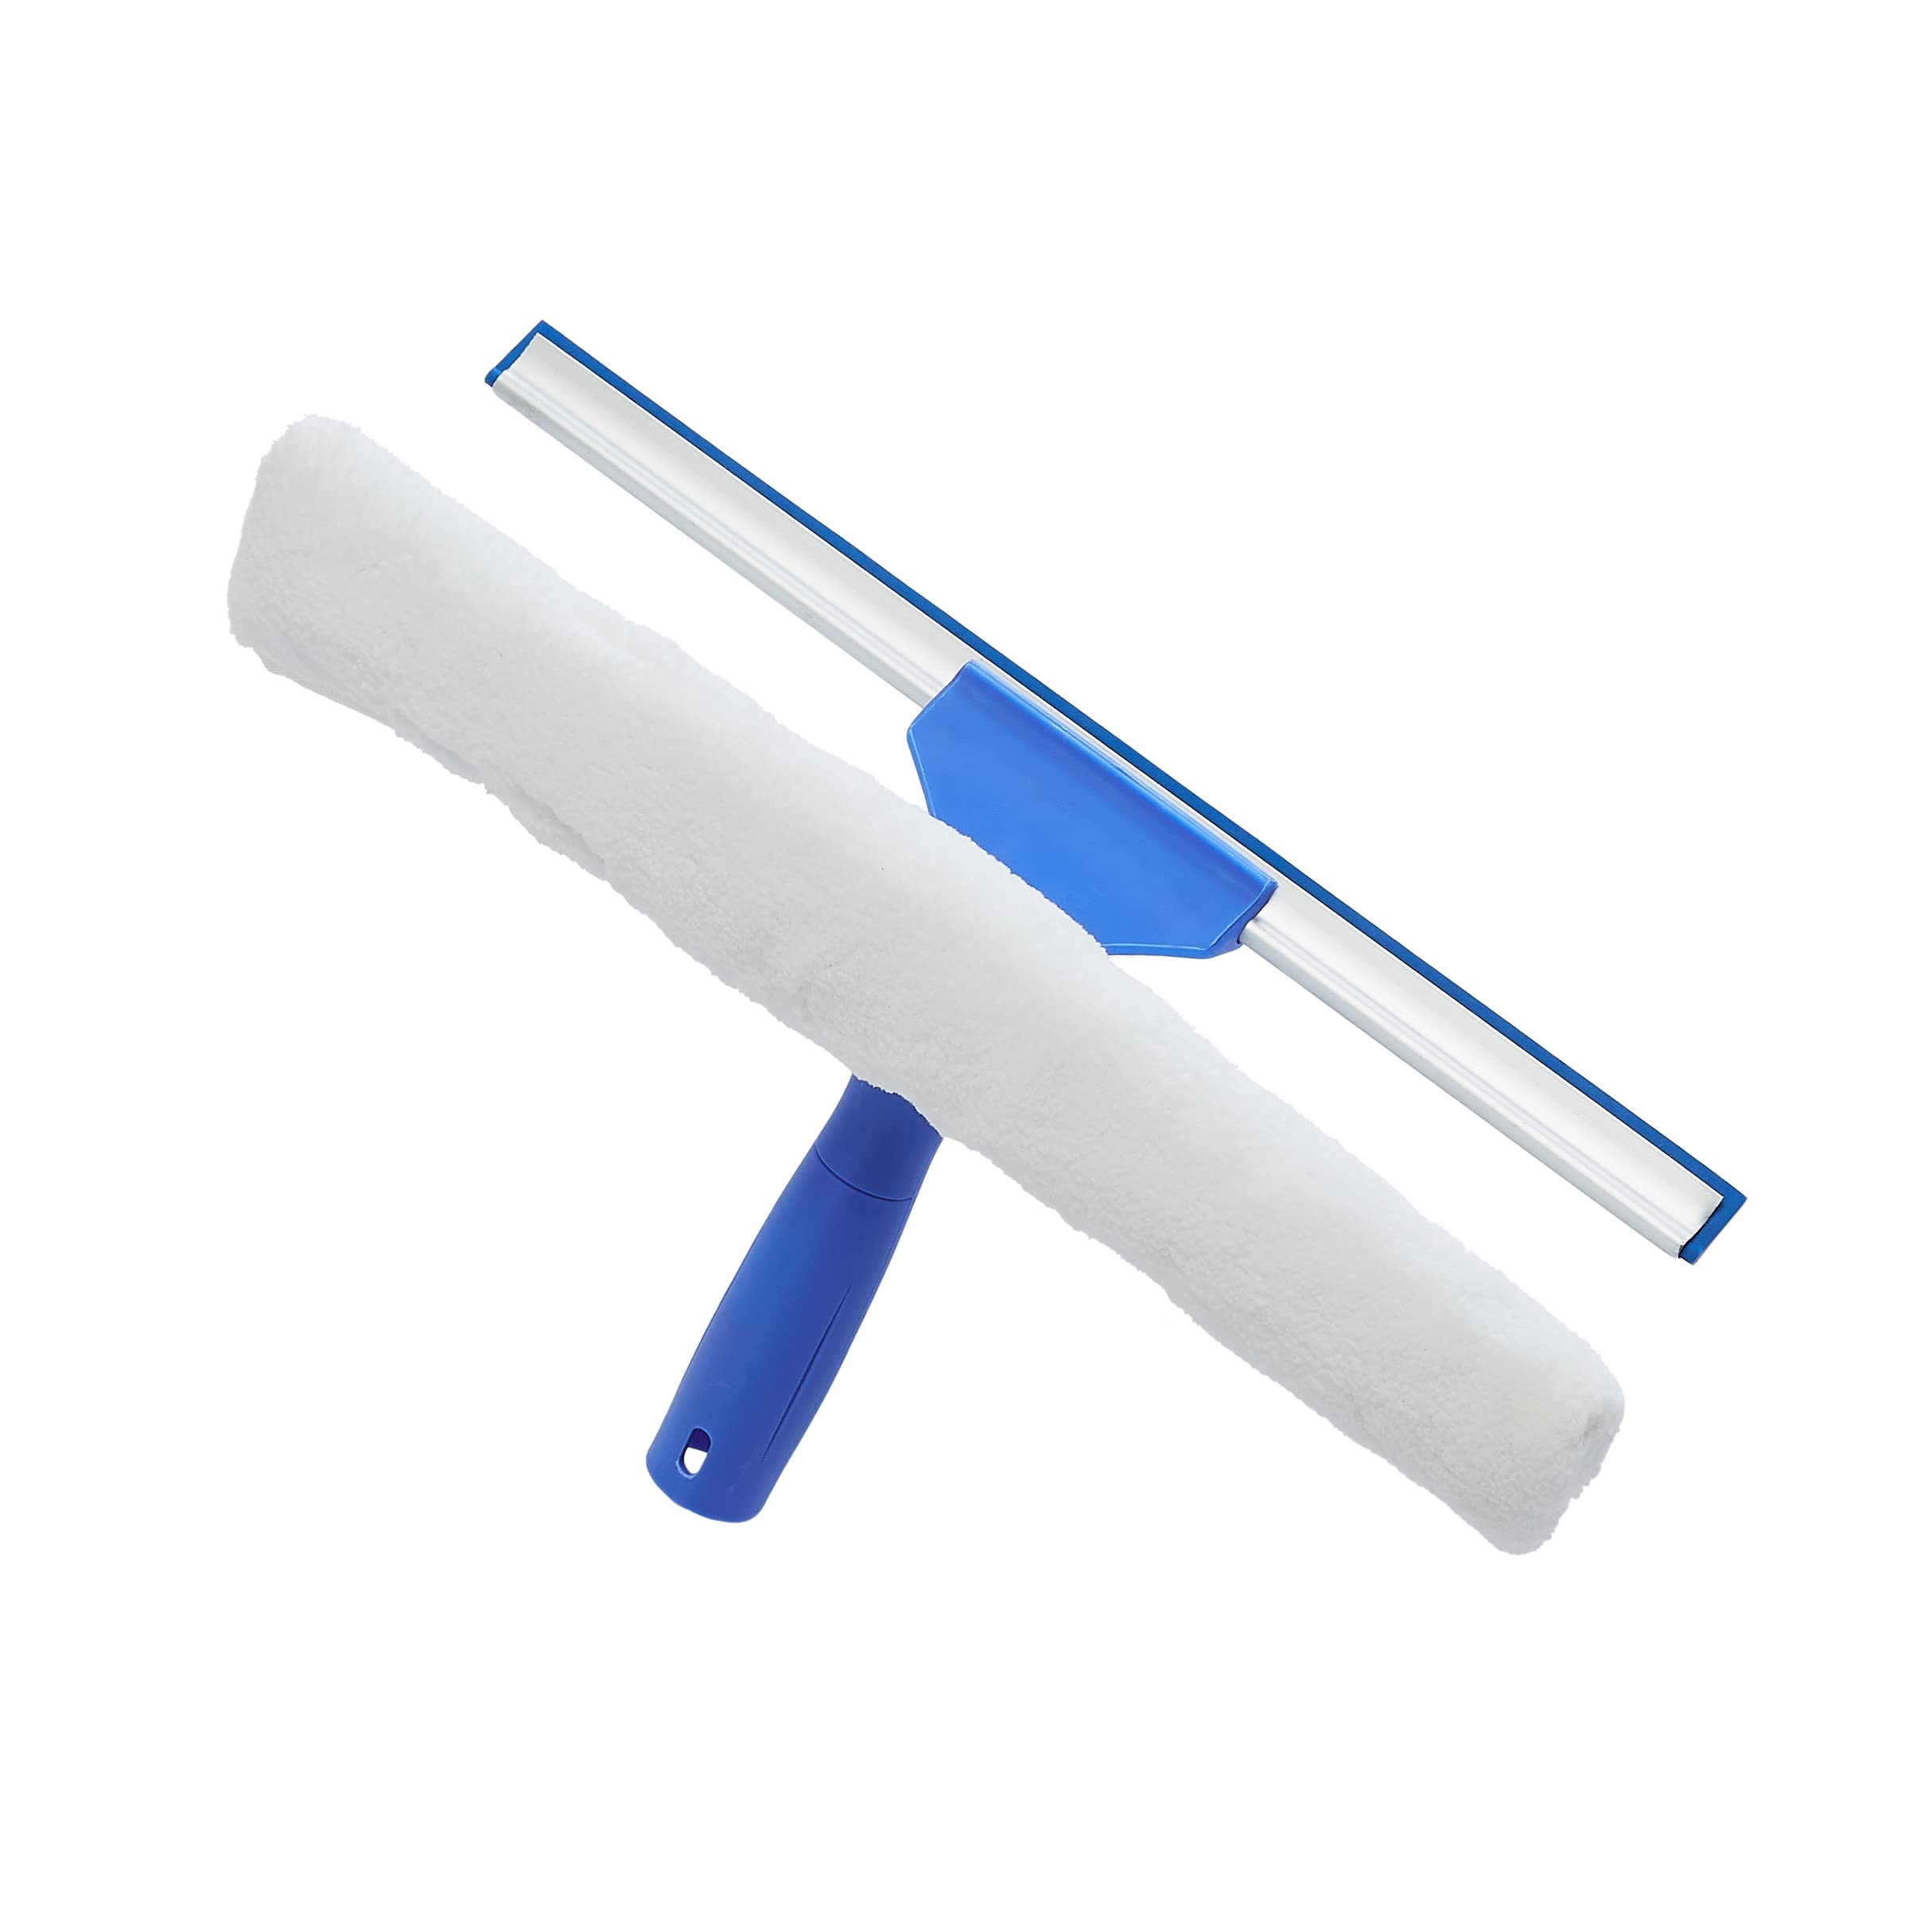 AmazonCommercial Squeegee and Window Scrubber, List Price is $16.19, Now Only $7, You Save $9.19